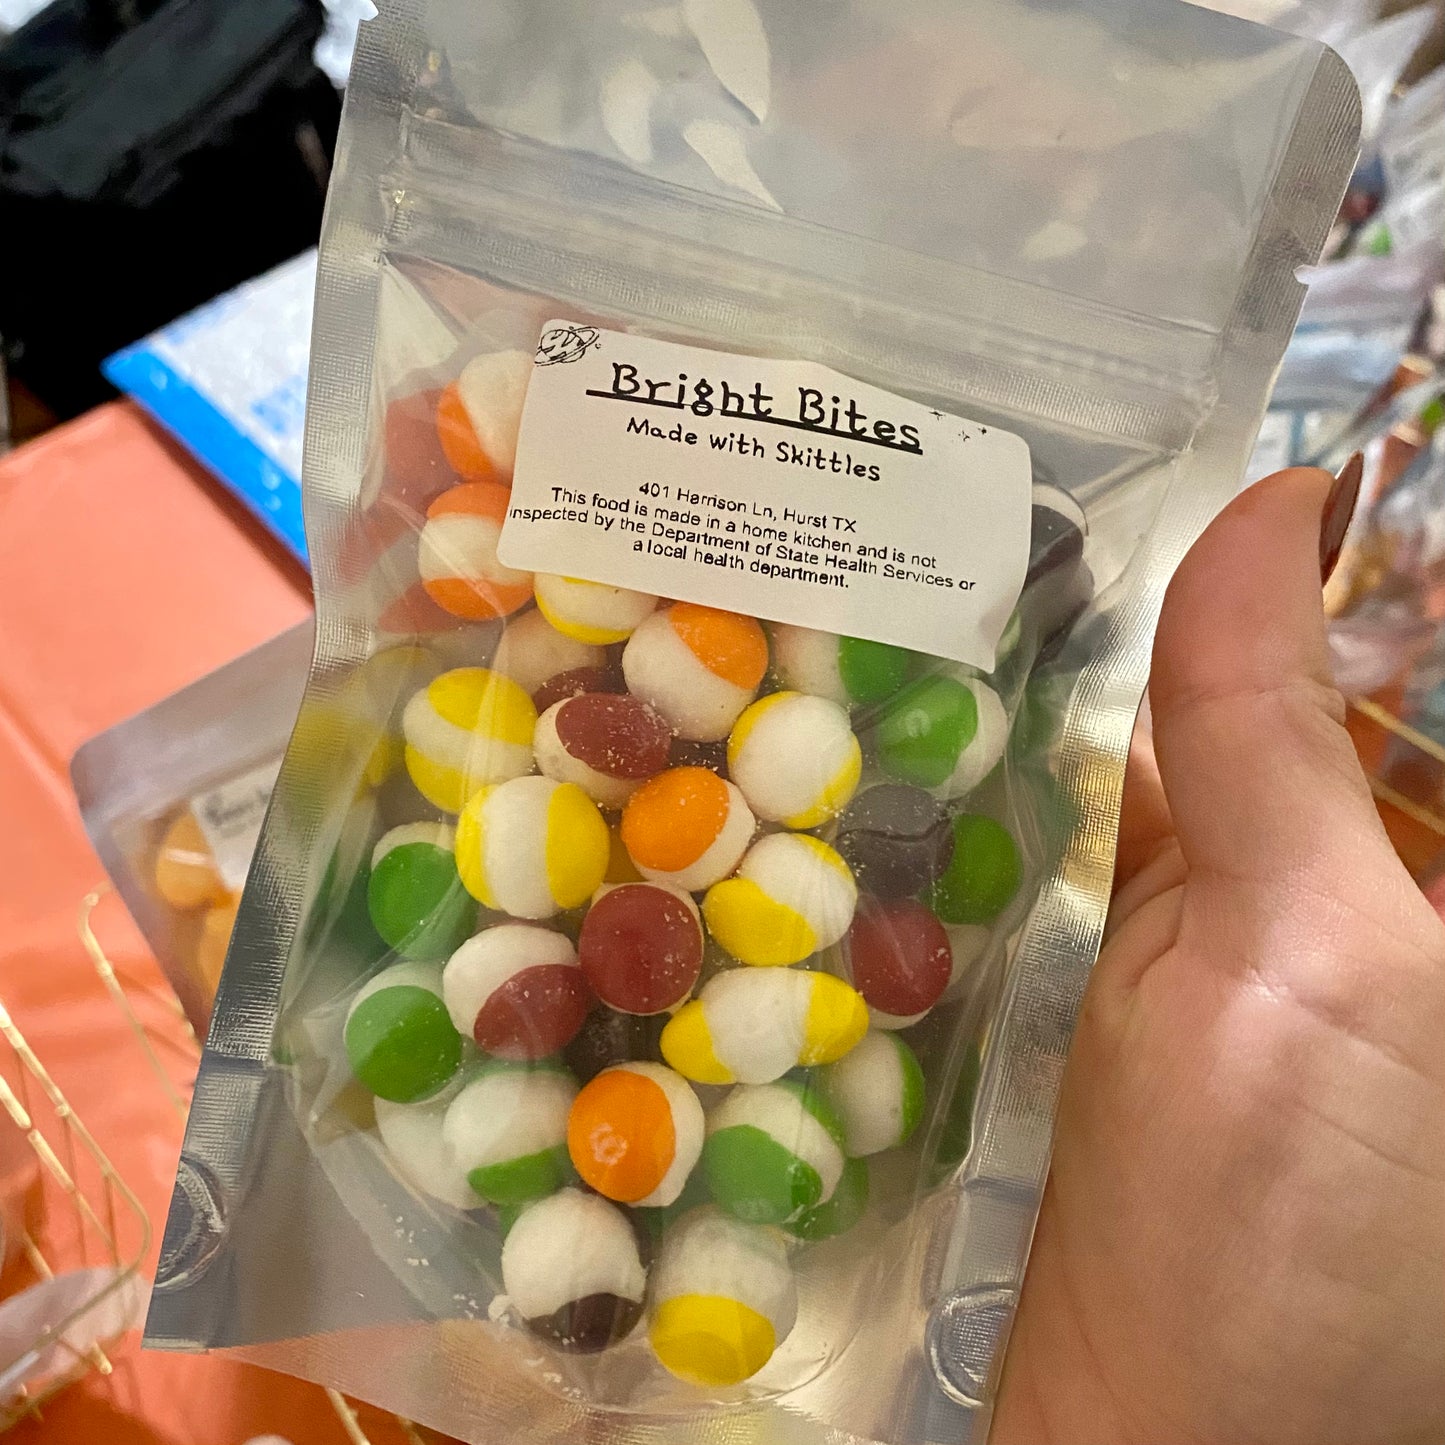 Bright Bites - freeze dried Skittles candy